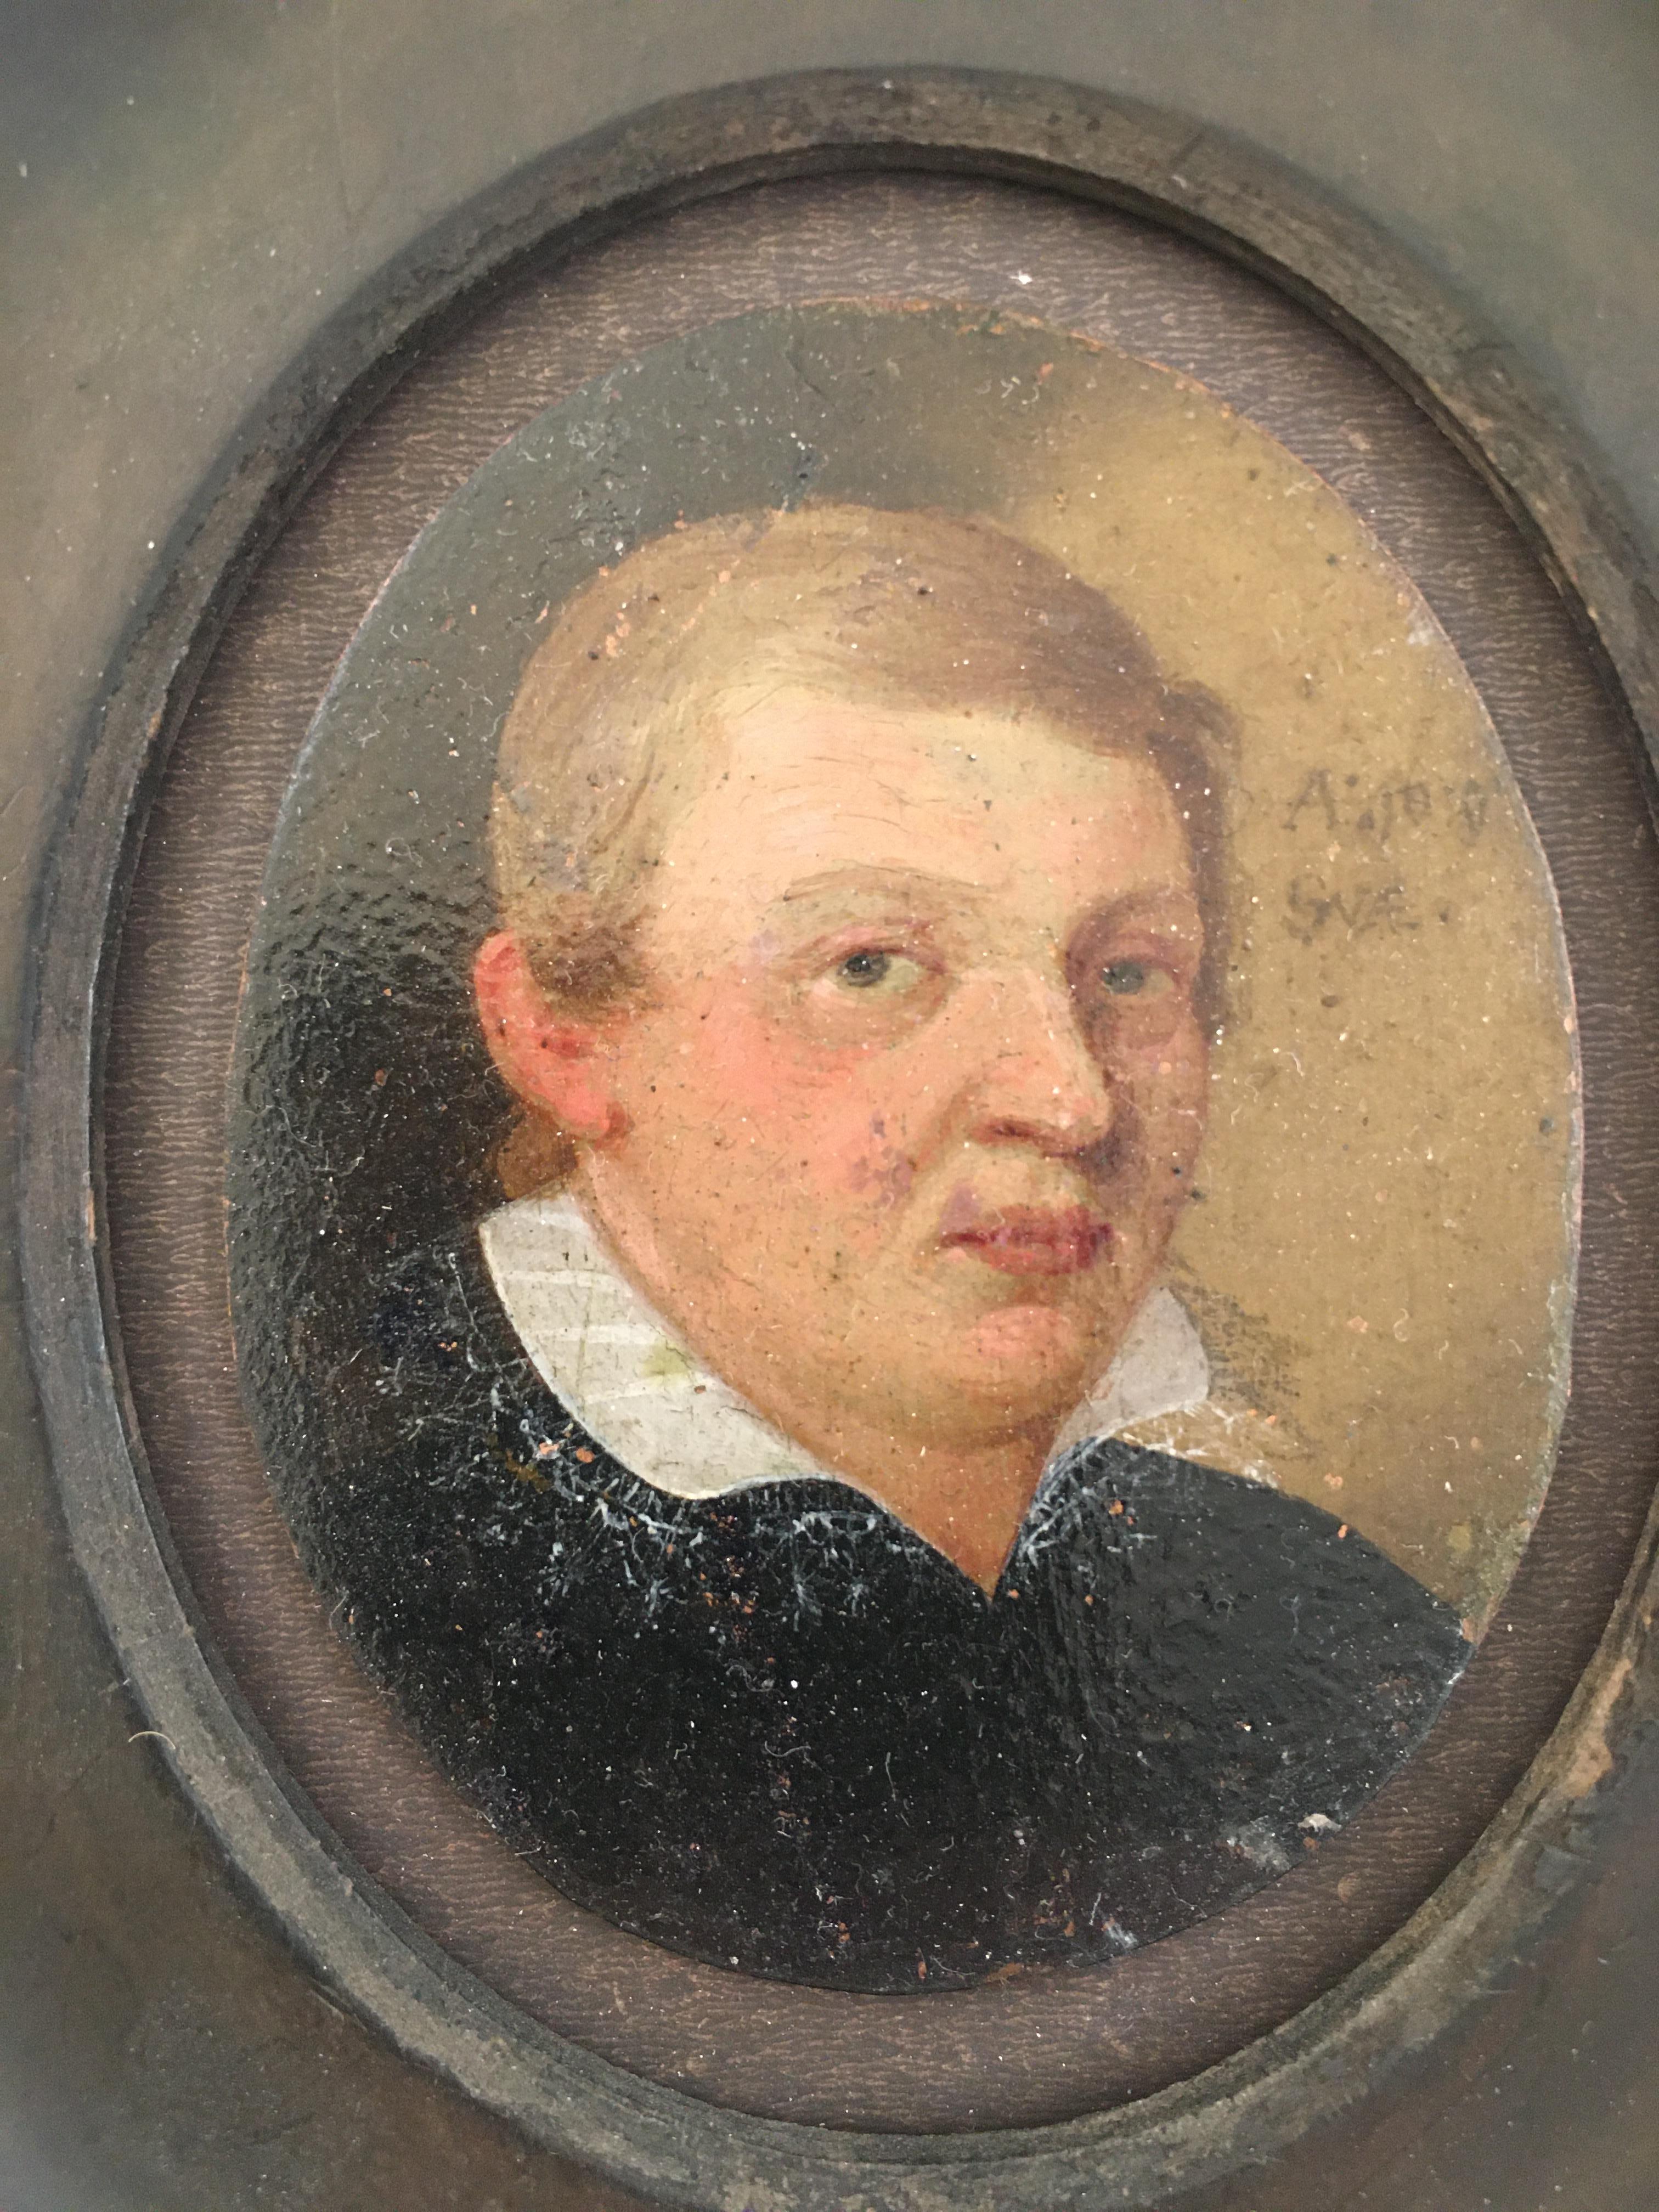 A small portrait of a young man, oil on copper.
Dated 1610 and with the text 